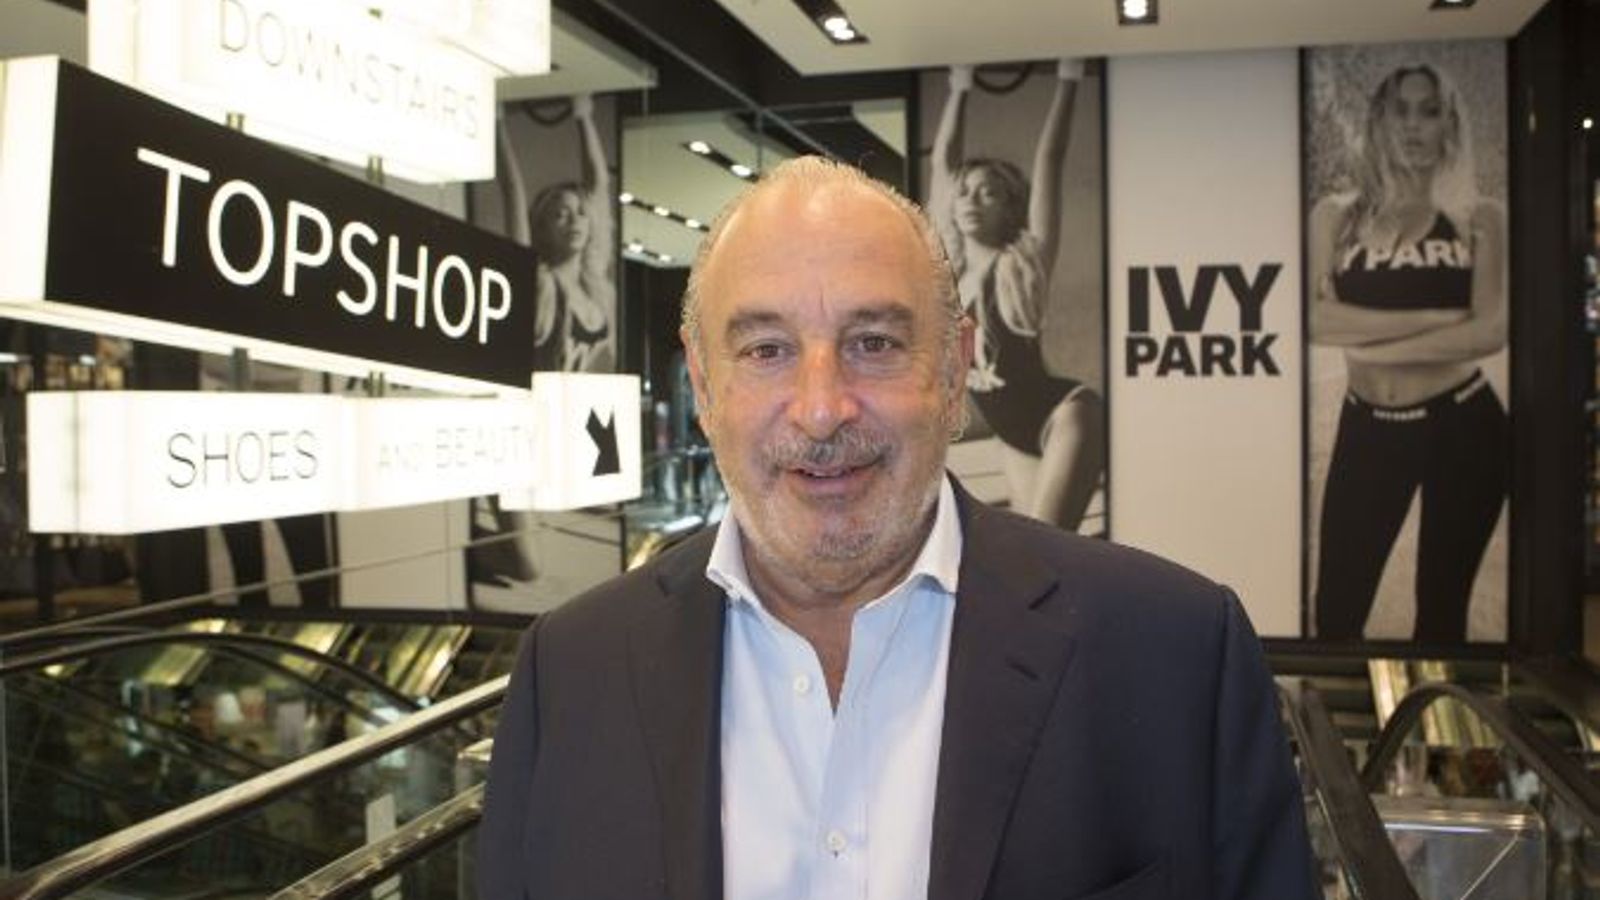 Topshop pensioners fashion £1bn funding deal with Aviva